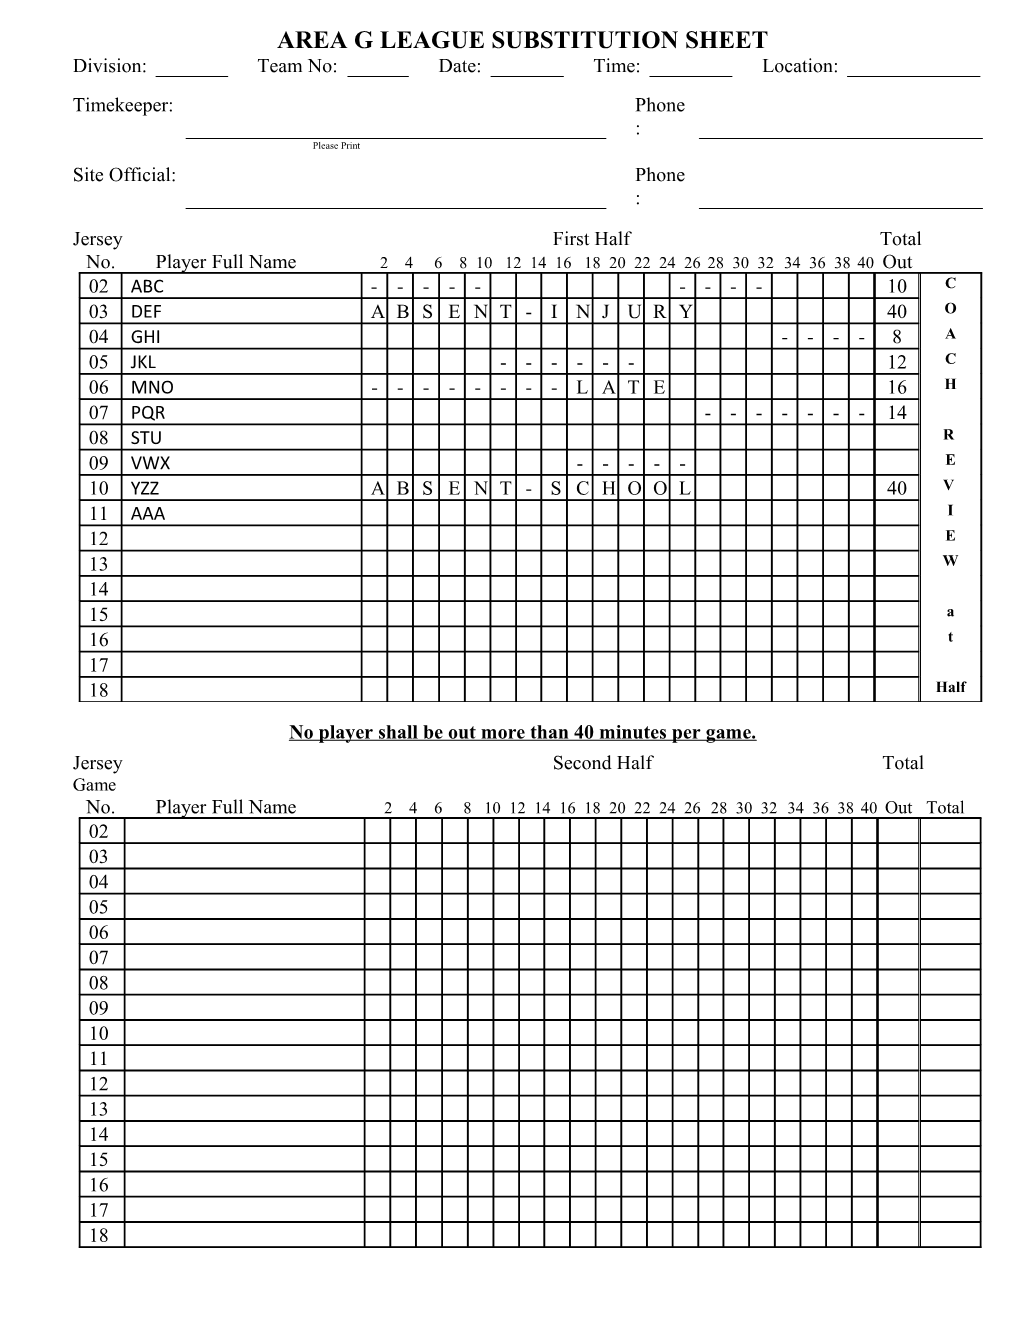 Area G Division 1 and 2 Substitution Sheet